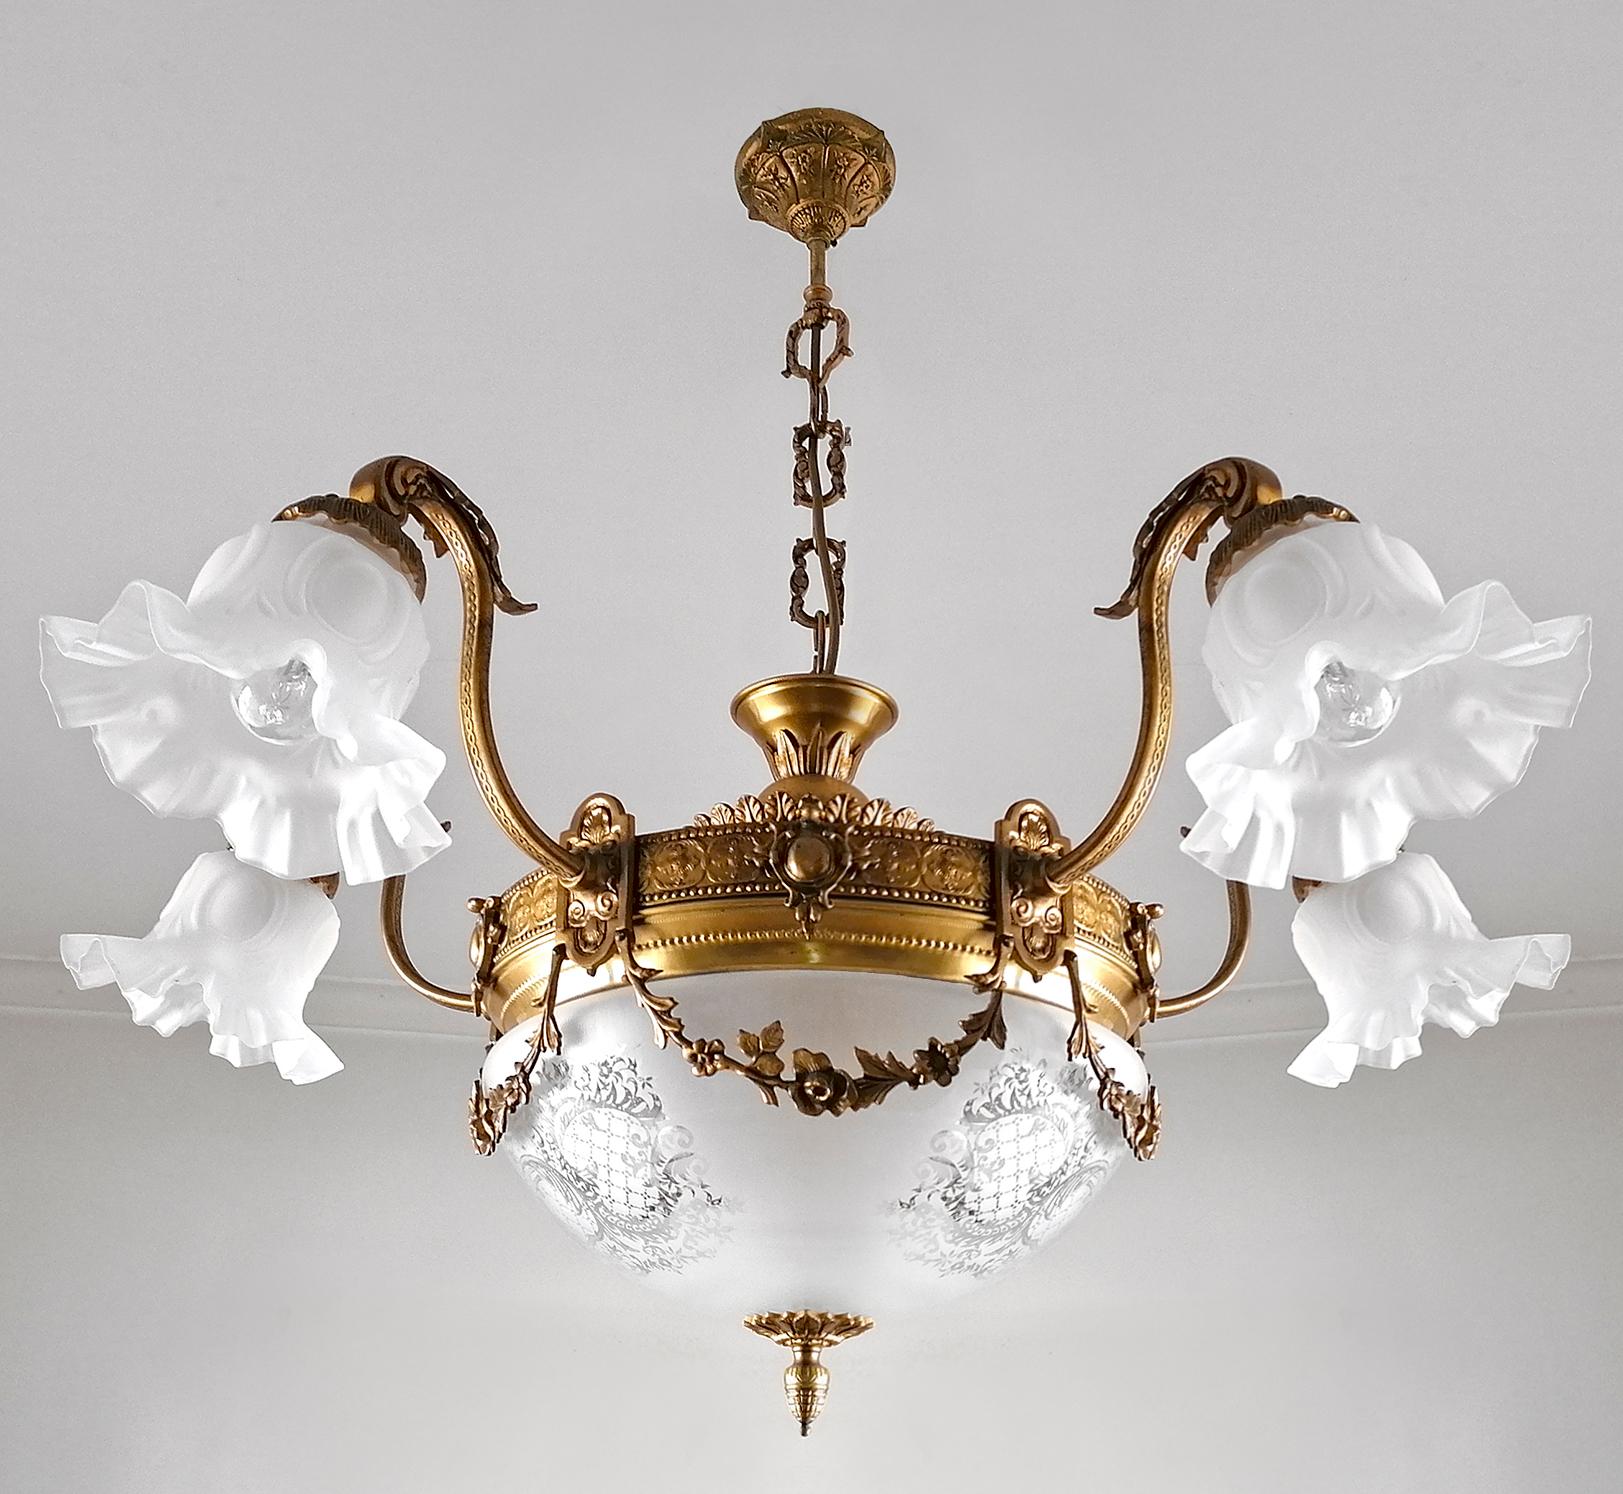 A wonderful gilt bronze and etched-glass 8-light ceiling fixture decorated with fine ornaments and garlands, France, early 20th century.
Dimensions
Height: 31.5 in. (80 cm)
Diameter: 35.44 in. (chain 10 in.)/(90 cm/chain 25cm)
8 light bulbs